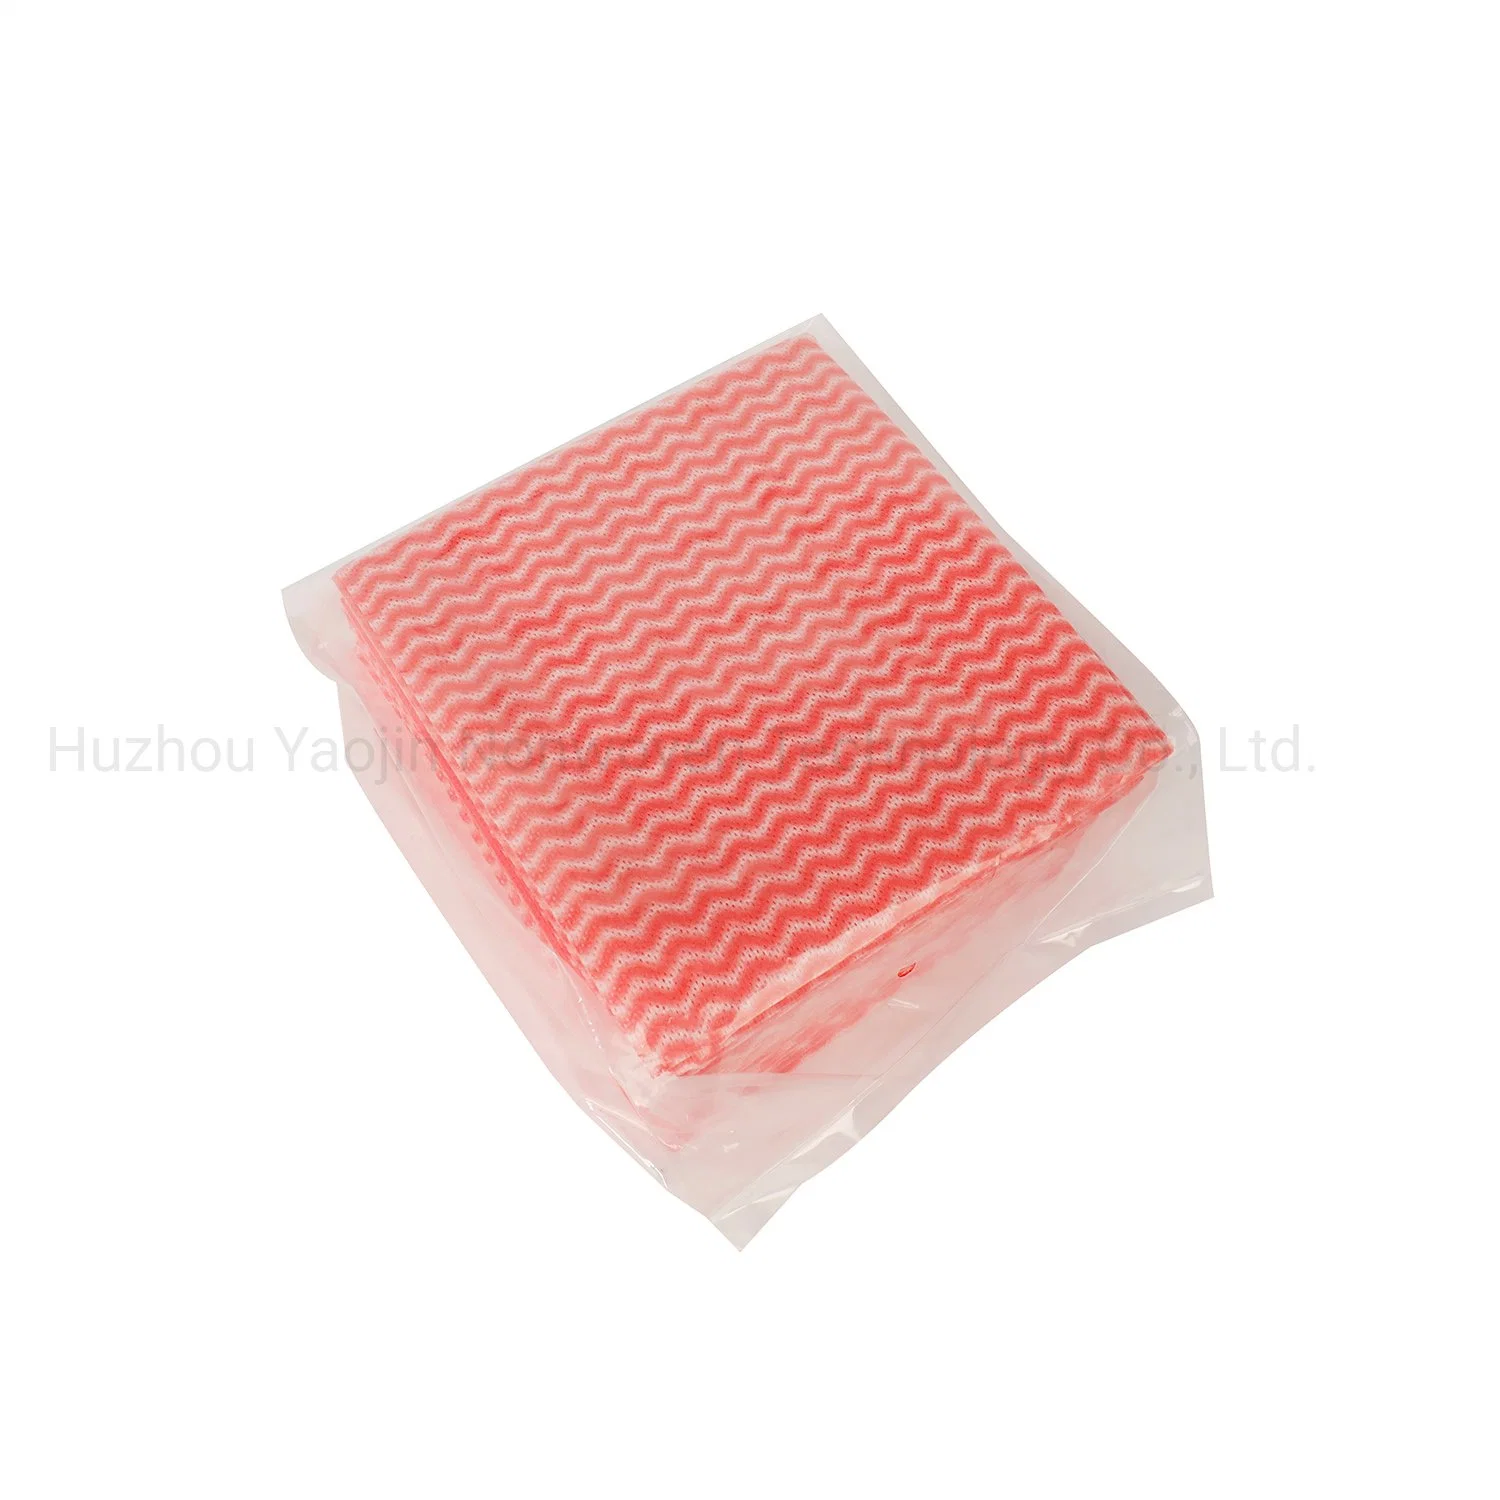 China Good Quality Non-Woven Oil Absorbing Cleaning Rag Cotton Cleaning Coloured Duster Cloth